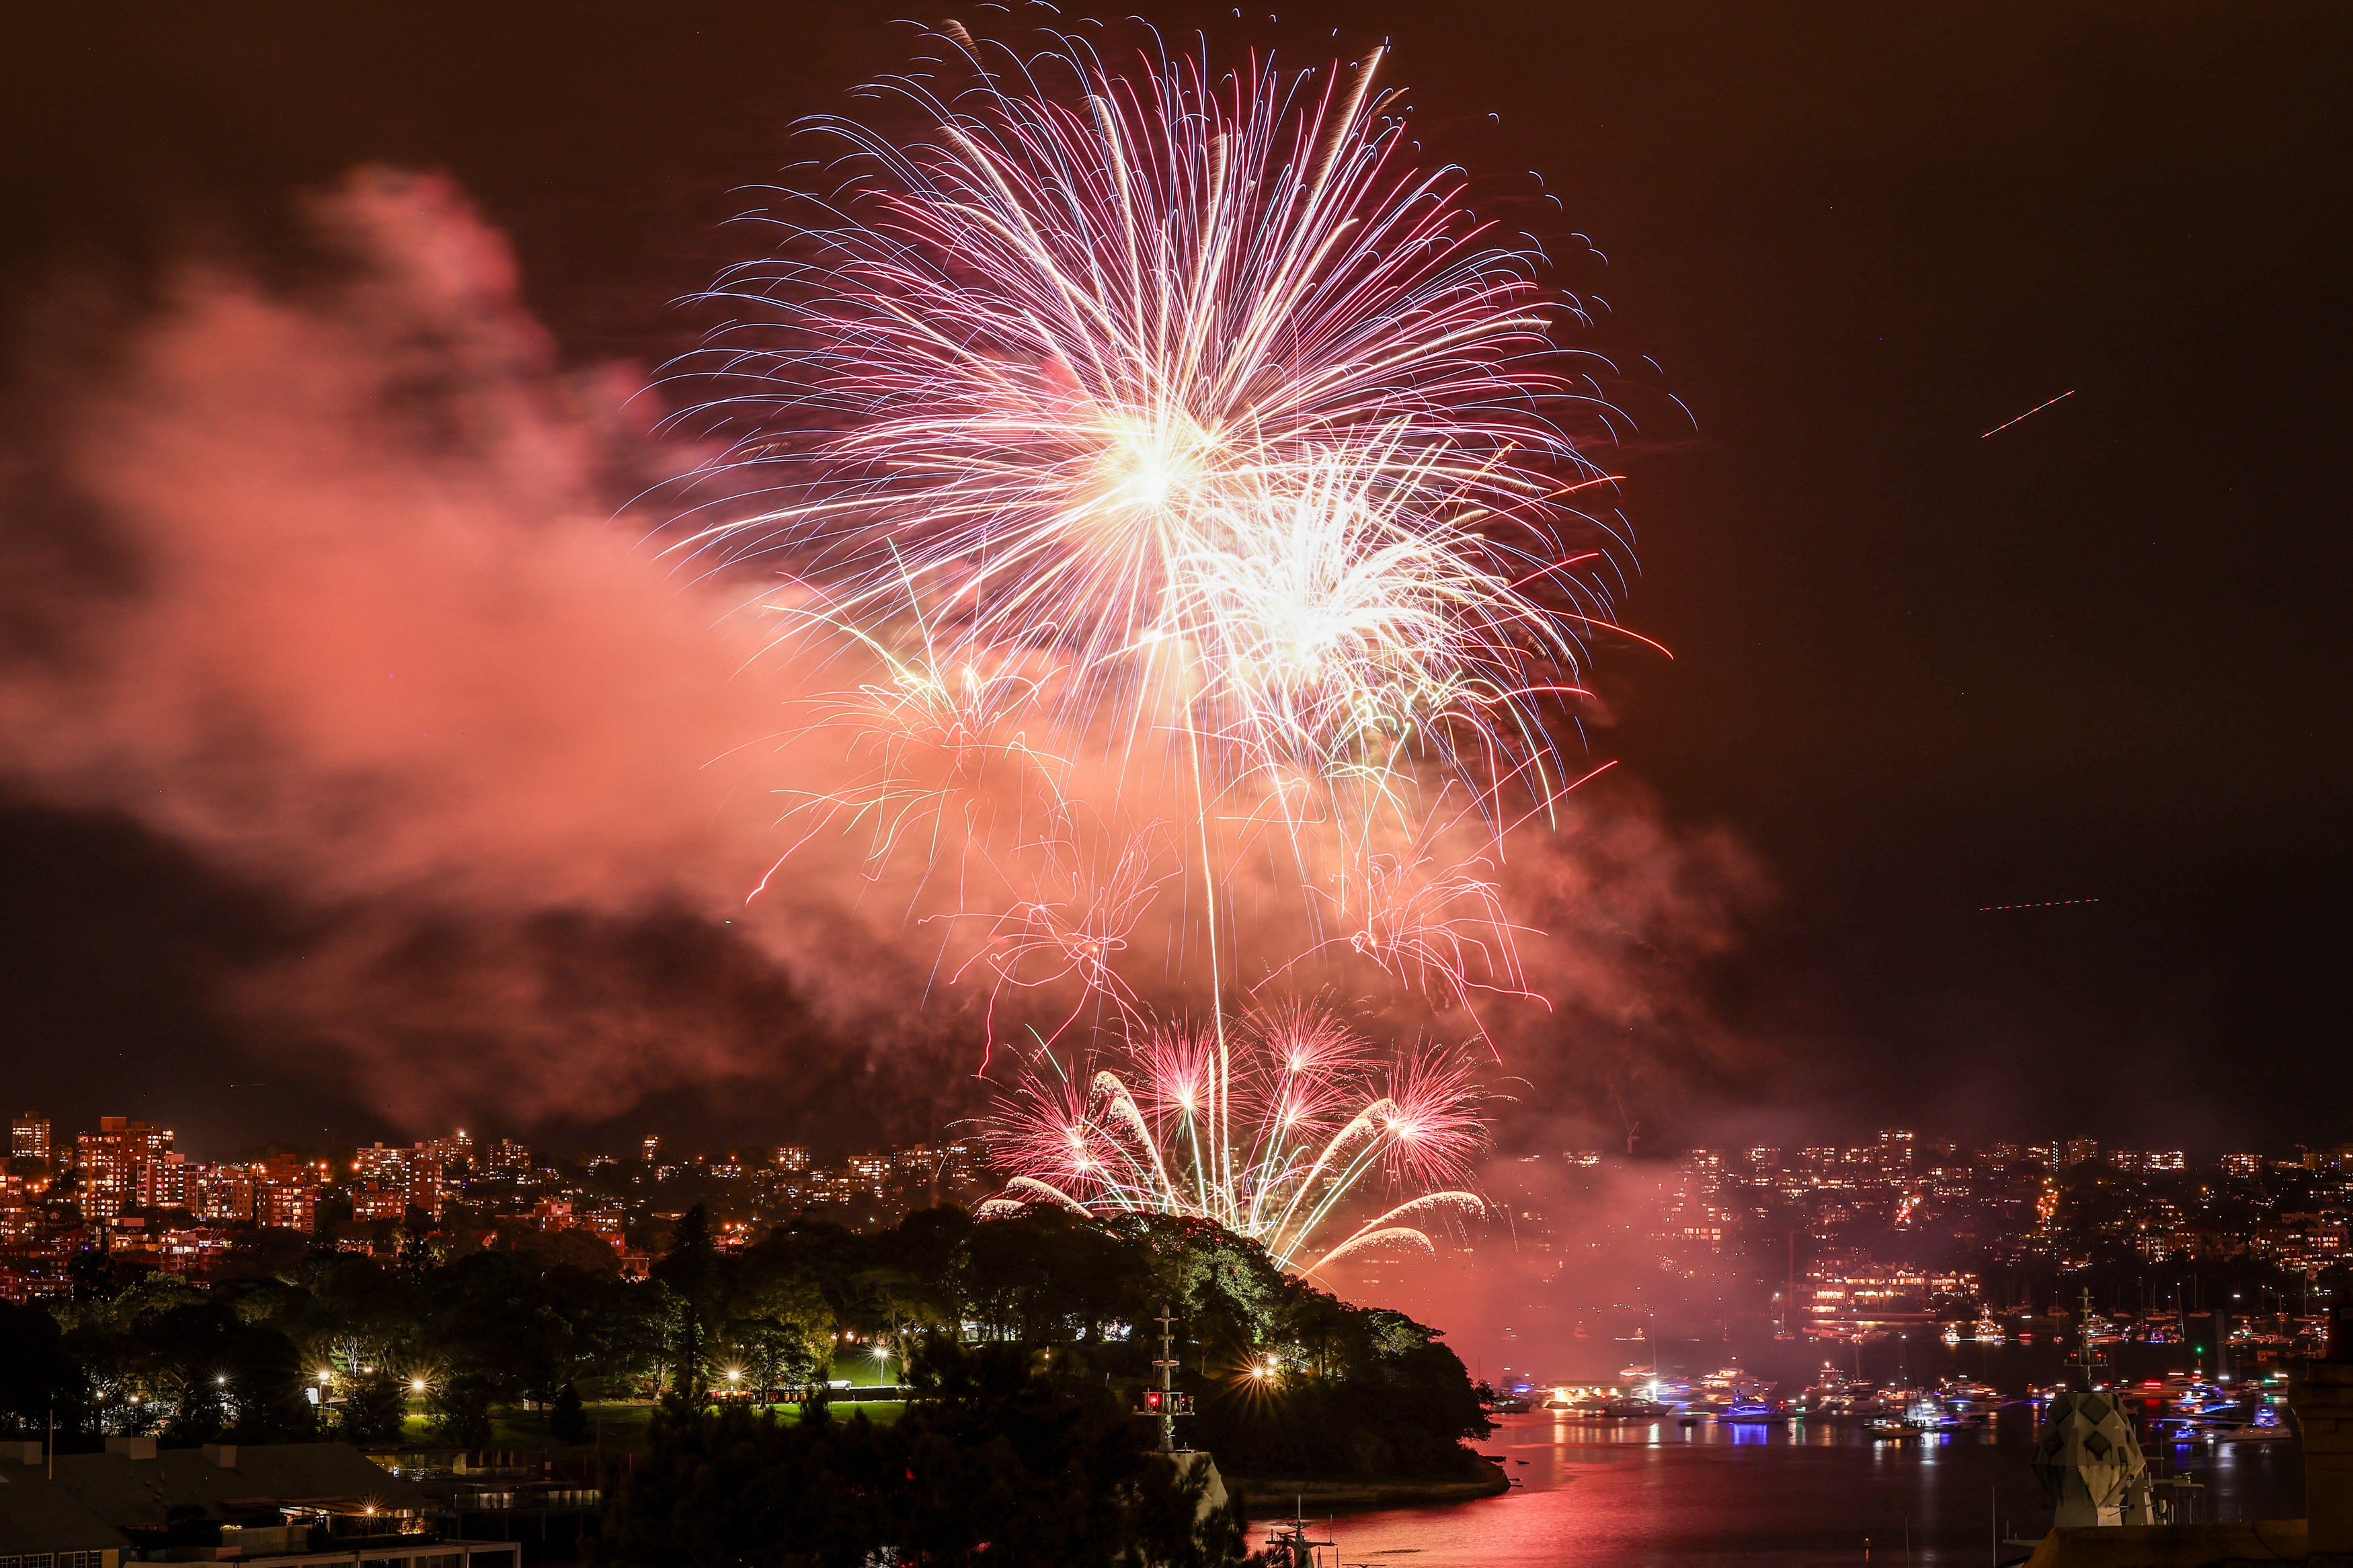 The 9pm "family fireworks" explode over boats on Sydney Harbour during New Year's Eve celebrations in Sydney